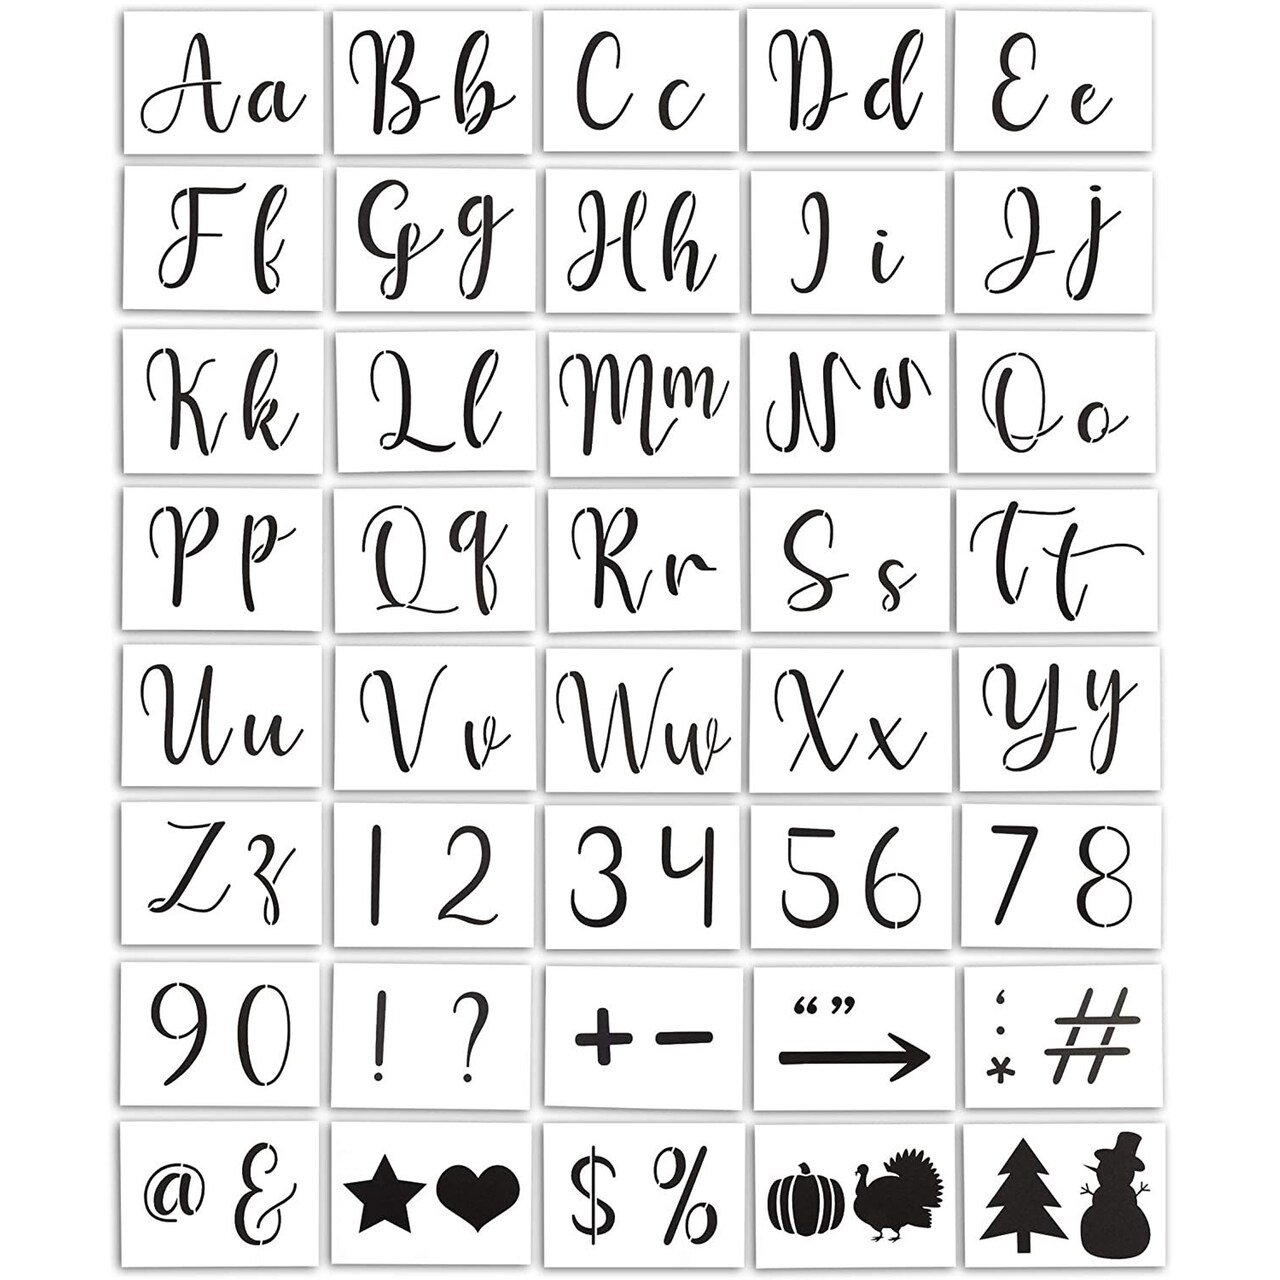 Reusable Letter and Number Stencils for Painting Wood Signs, Walls, Fabric,  DIY Decor (8 x 5.75 in, 44 Sheets)